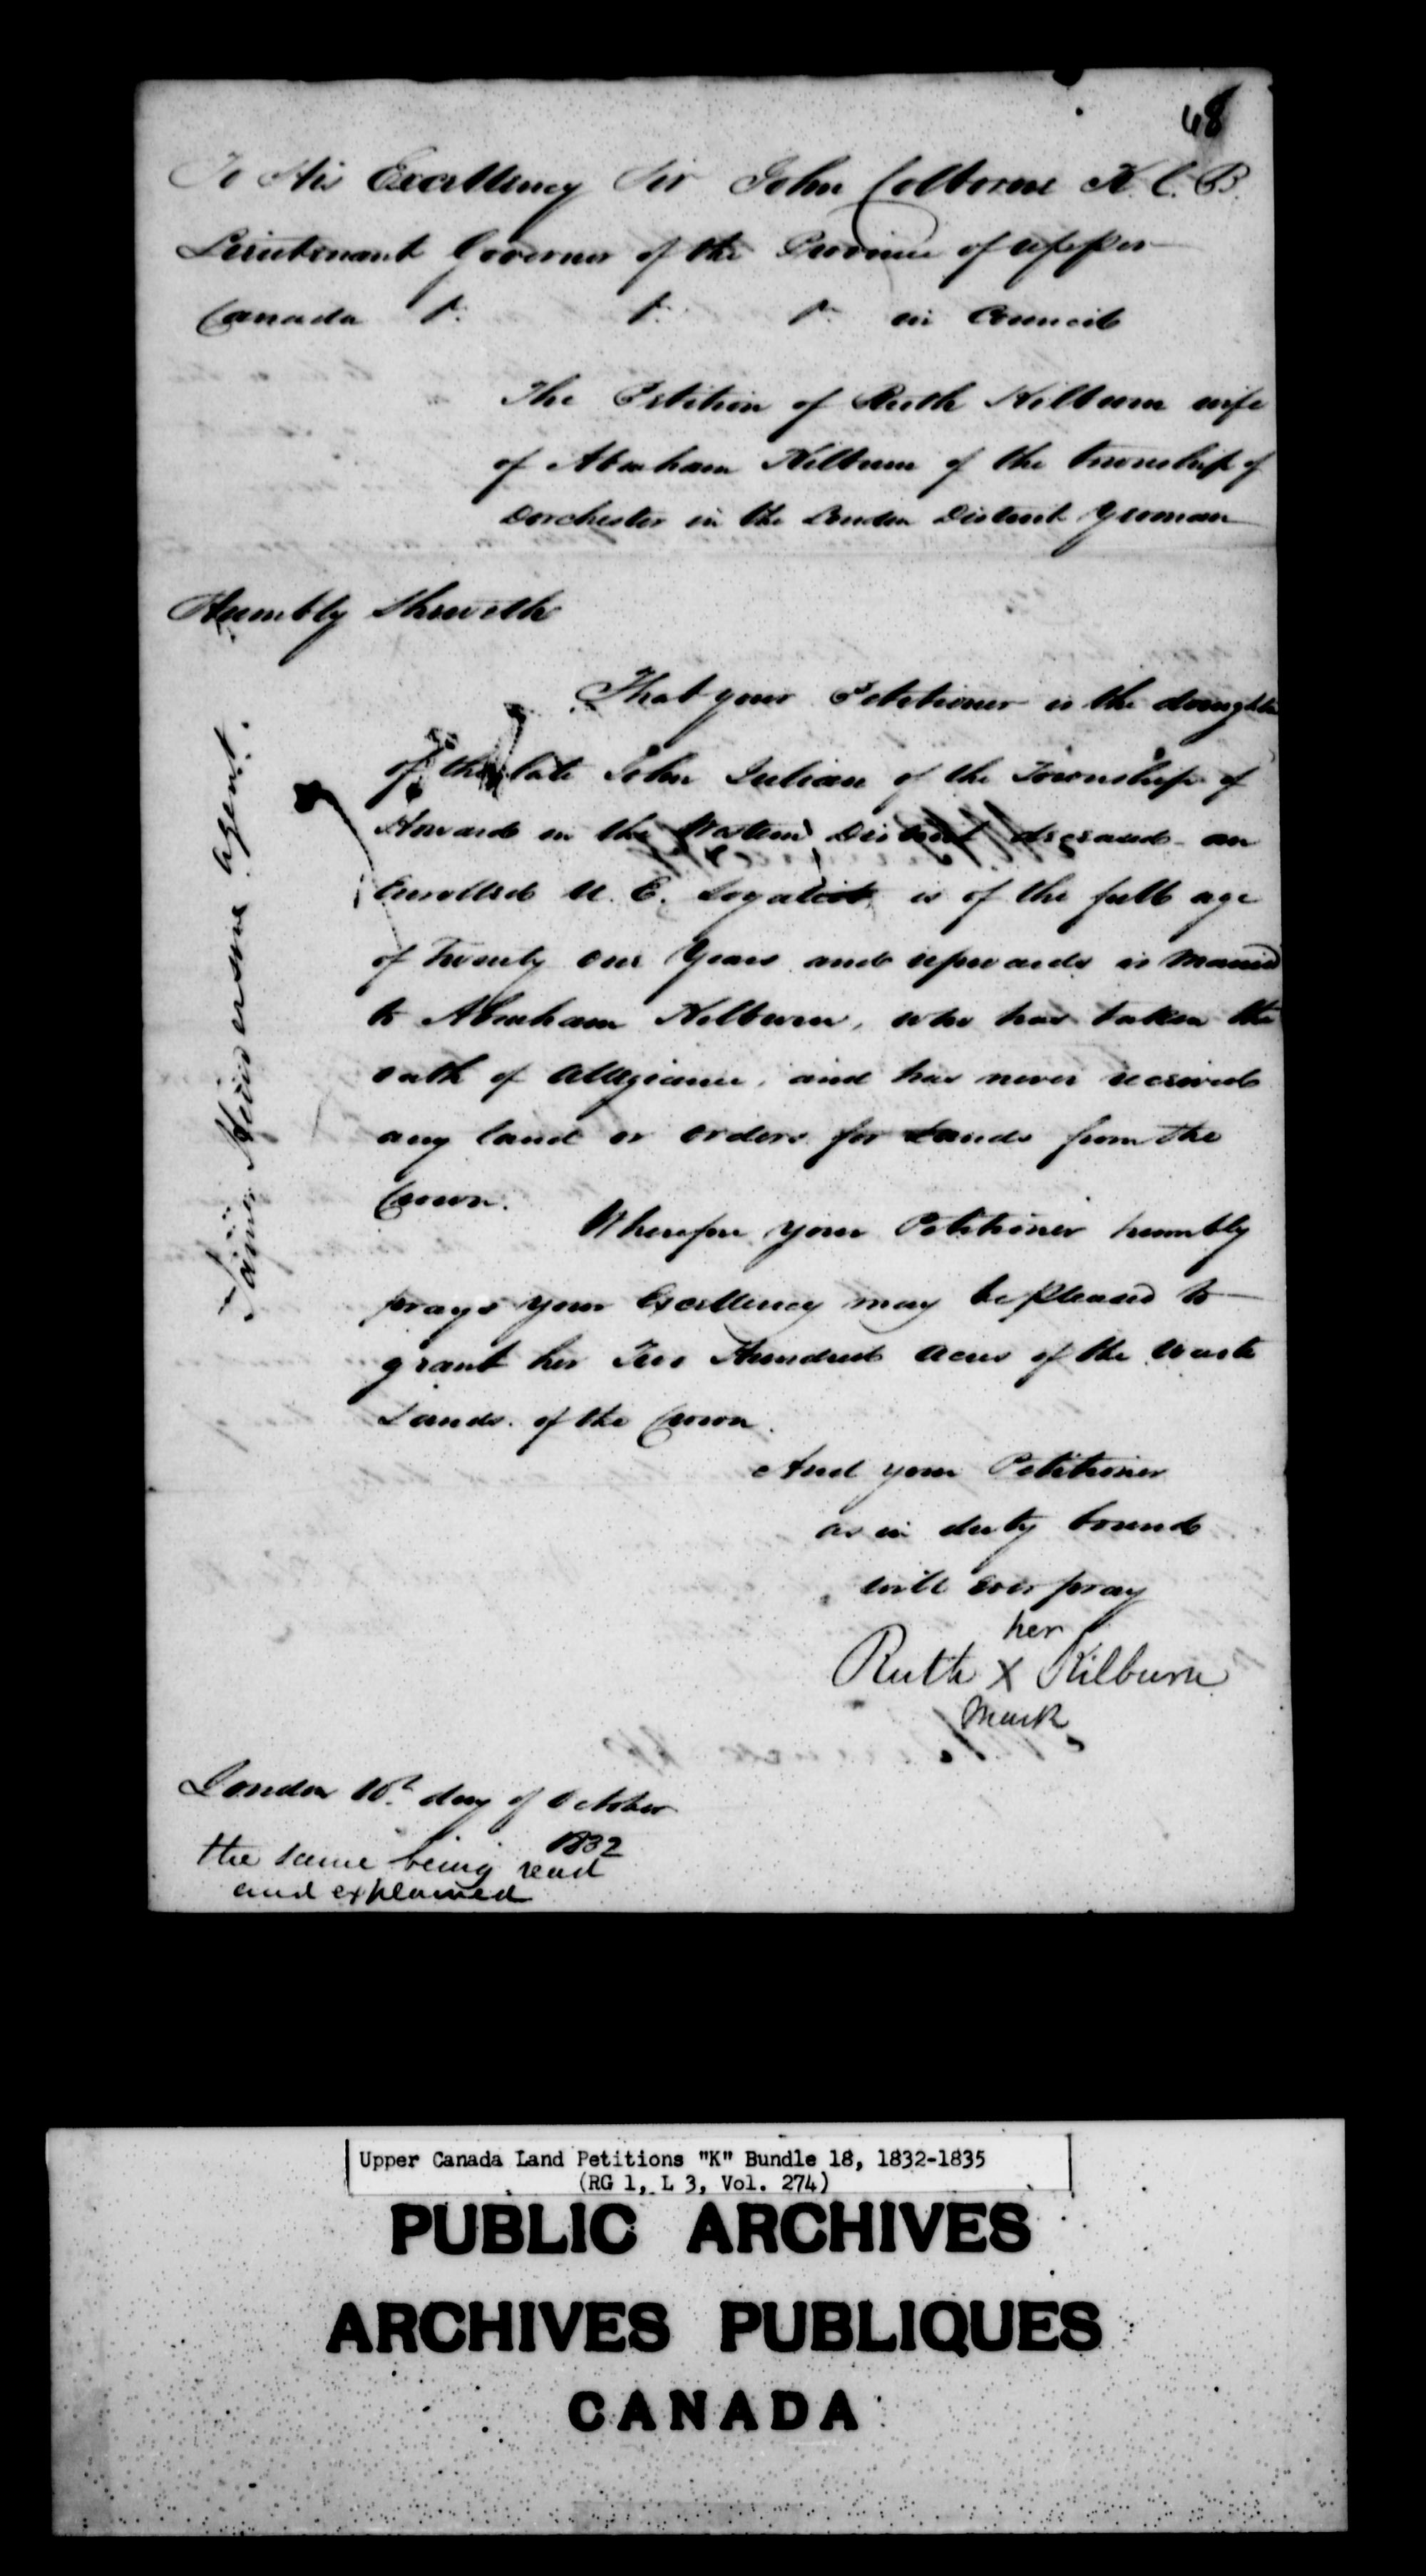 Title: Upper Canada Land Petitions (1763-1865) - Mikan Number: 205131 - Microform: c-2119